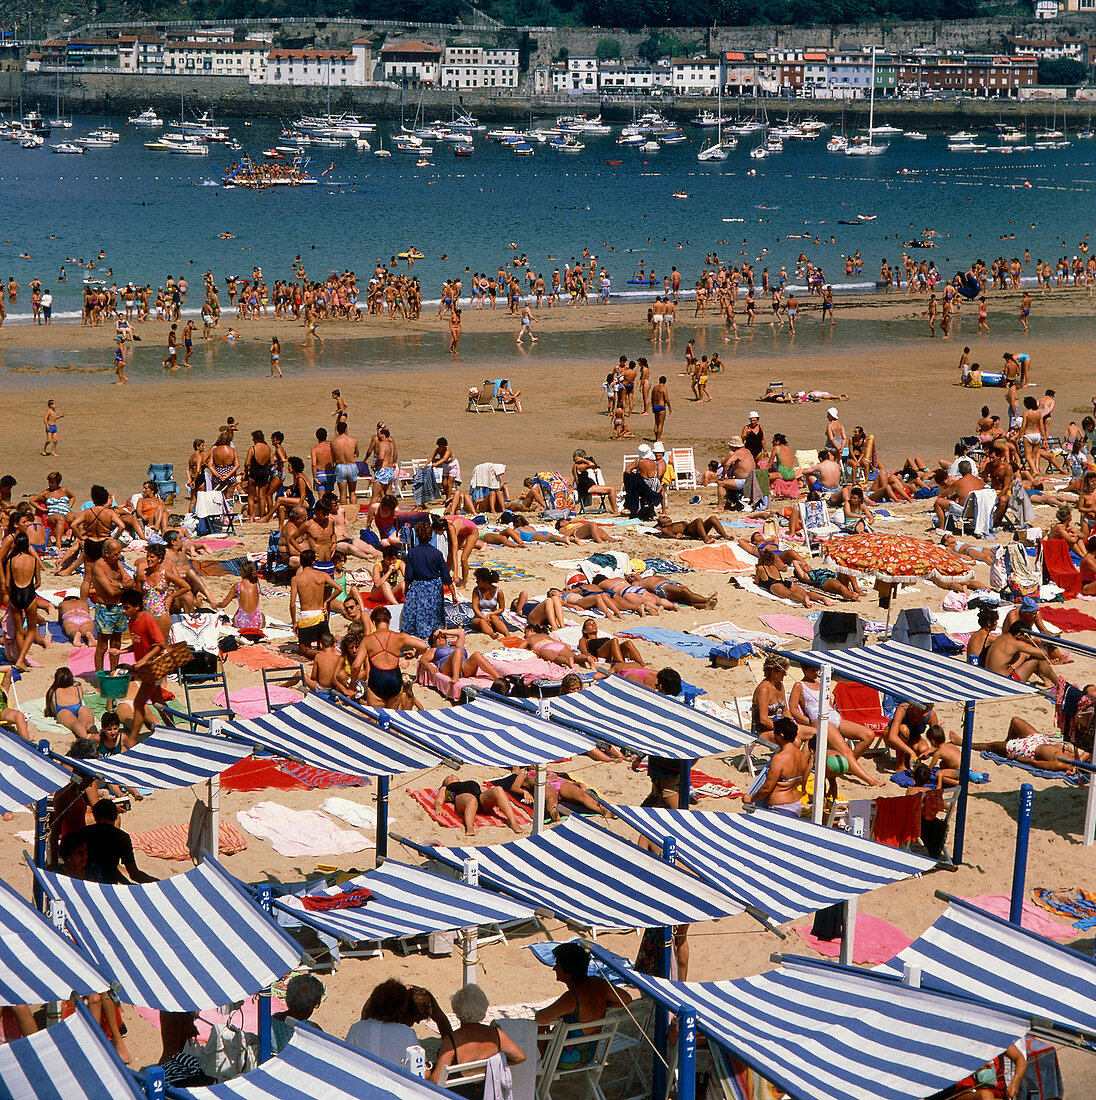 View of a crowded beach in summer